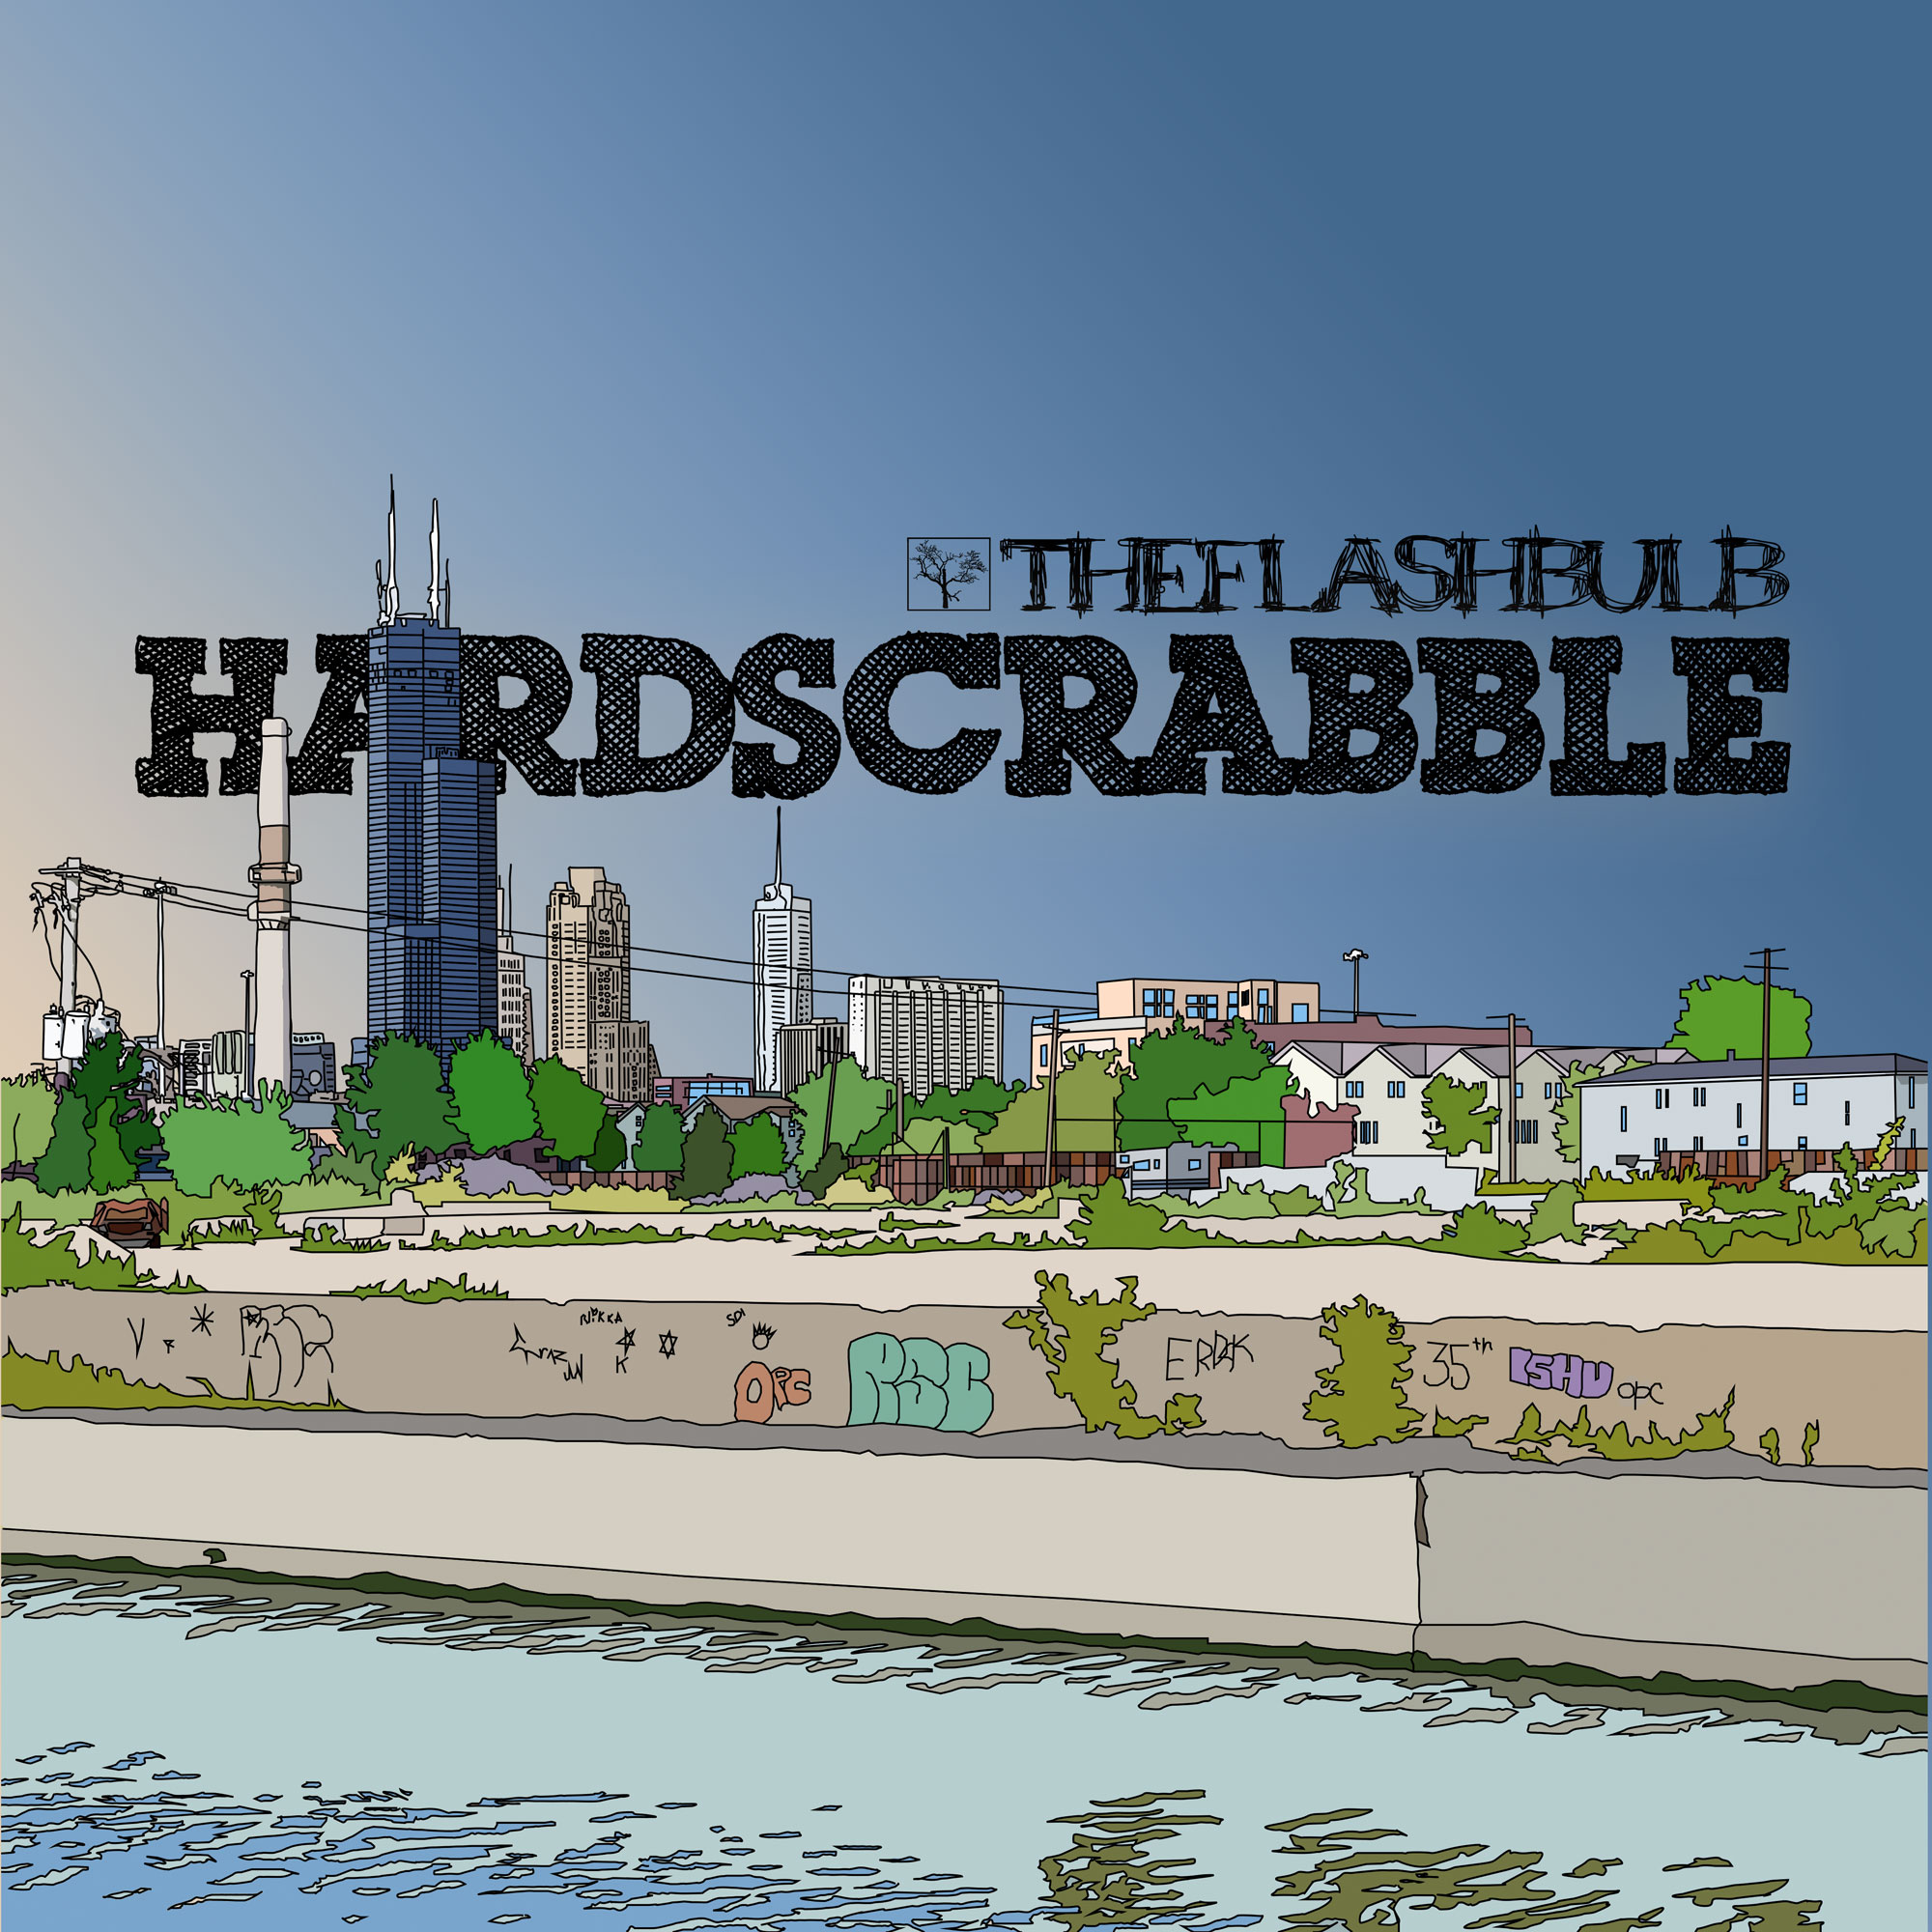 News Added Oct 24, 2012 The Flashbulb's latest effort, titled "Hardscrabble" after the area in Chicago where he's been expanding the Alphabasic empire, is a pleasantly unexpected return to his more challenging and hyper-creative endeavors last seen in releases like Kirlian Selections and Flexing Habitual. The only common quality that Hardscrabble's songs share is unorthodox […]